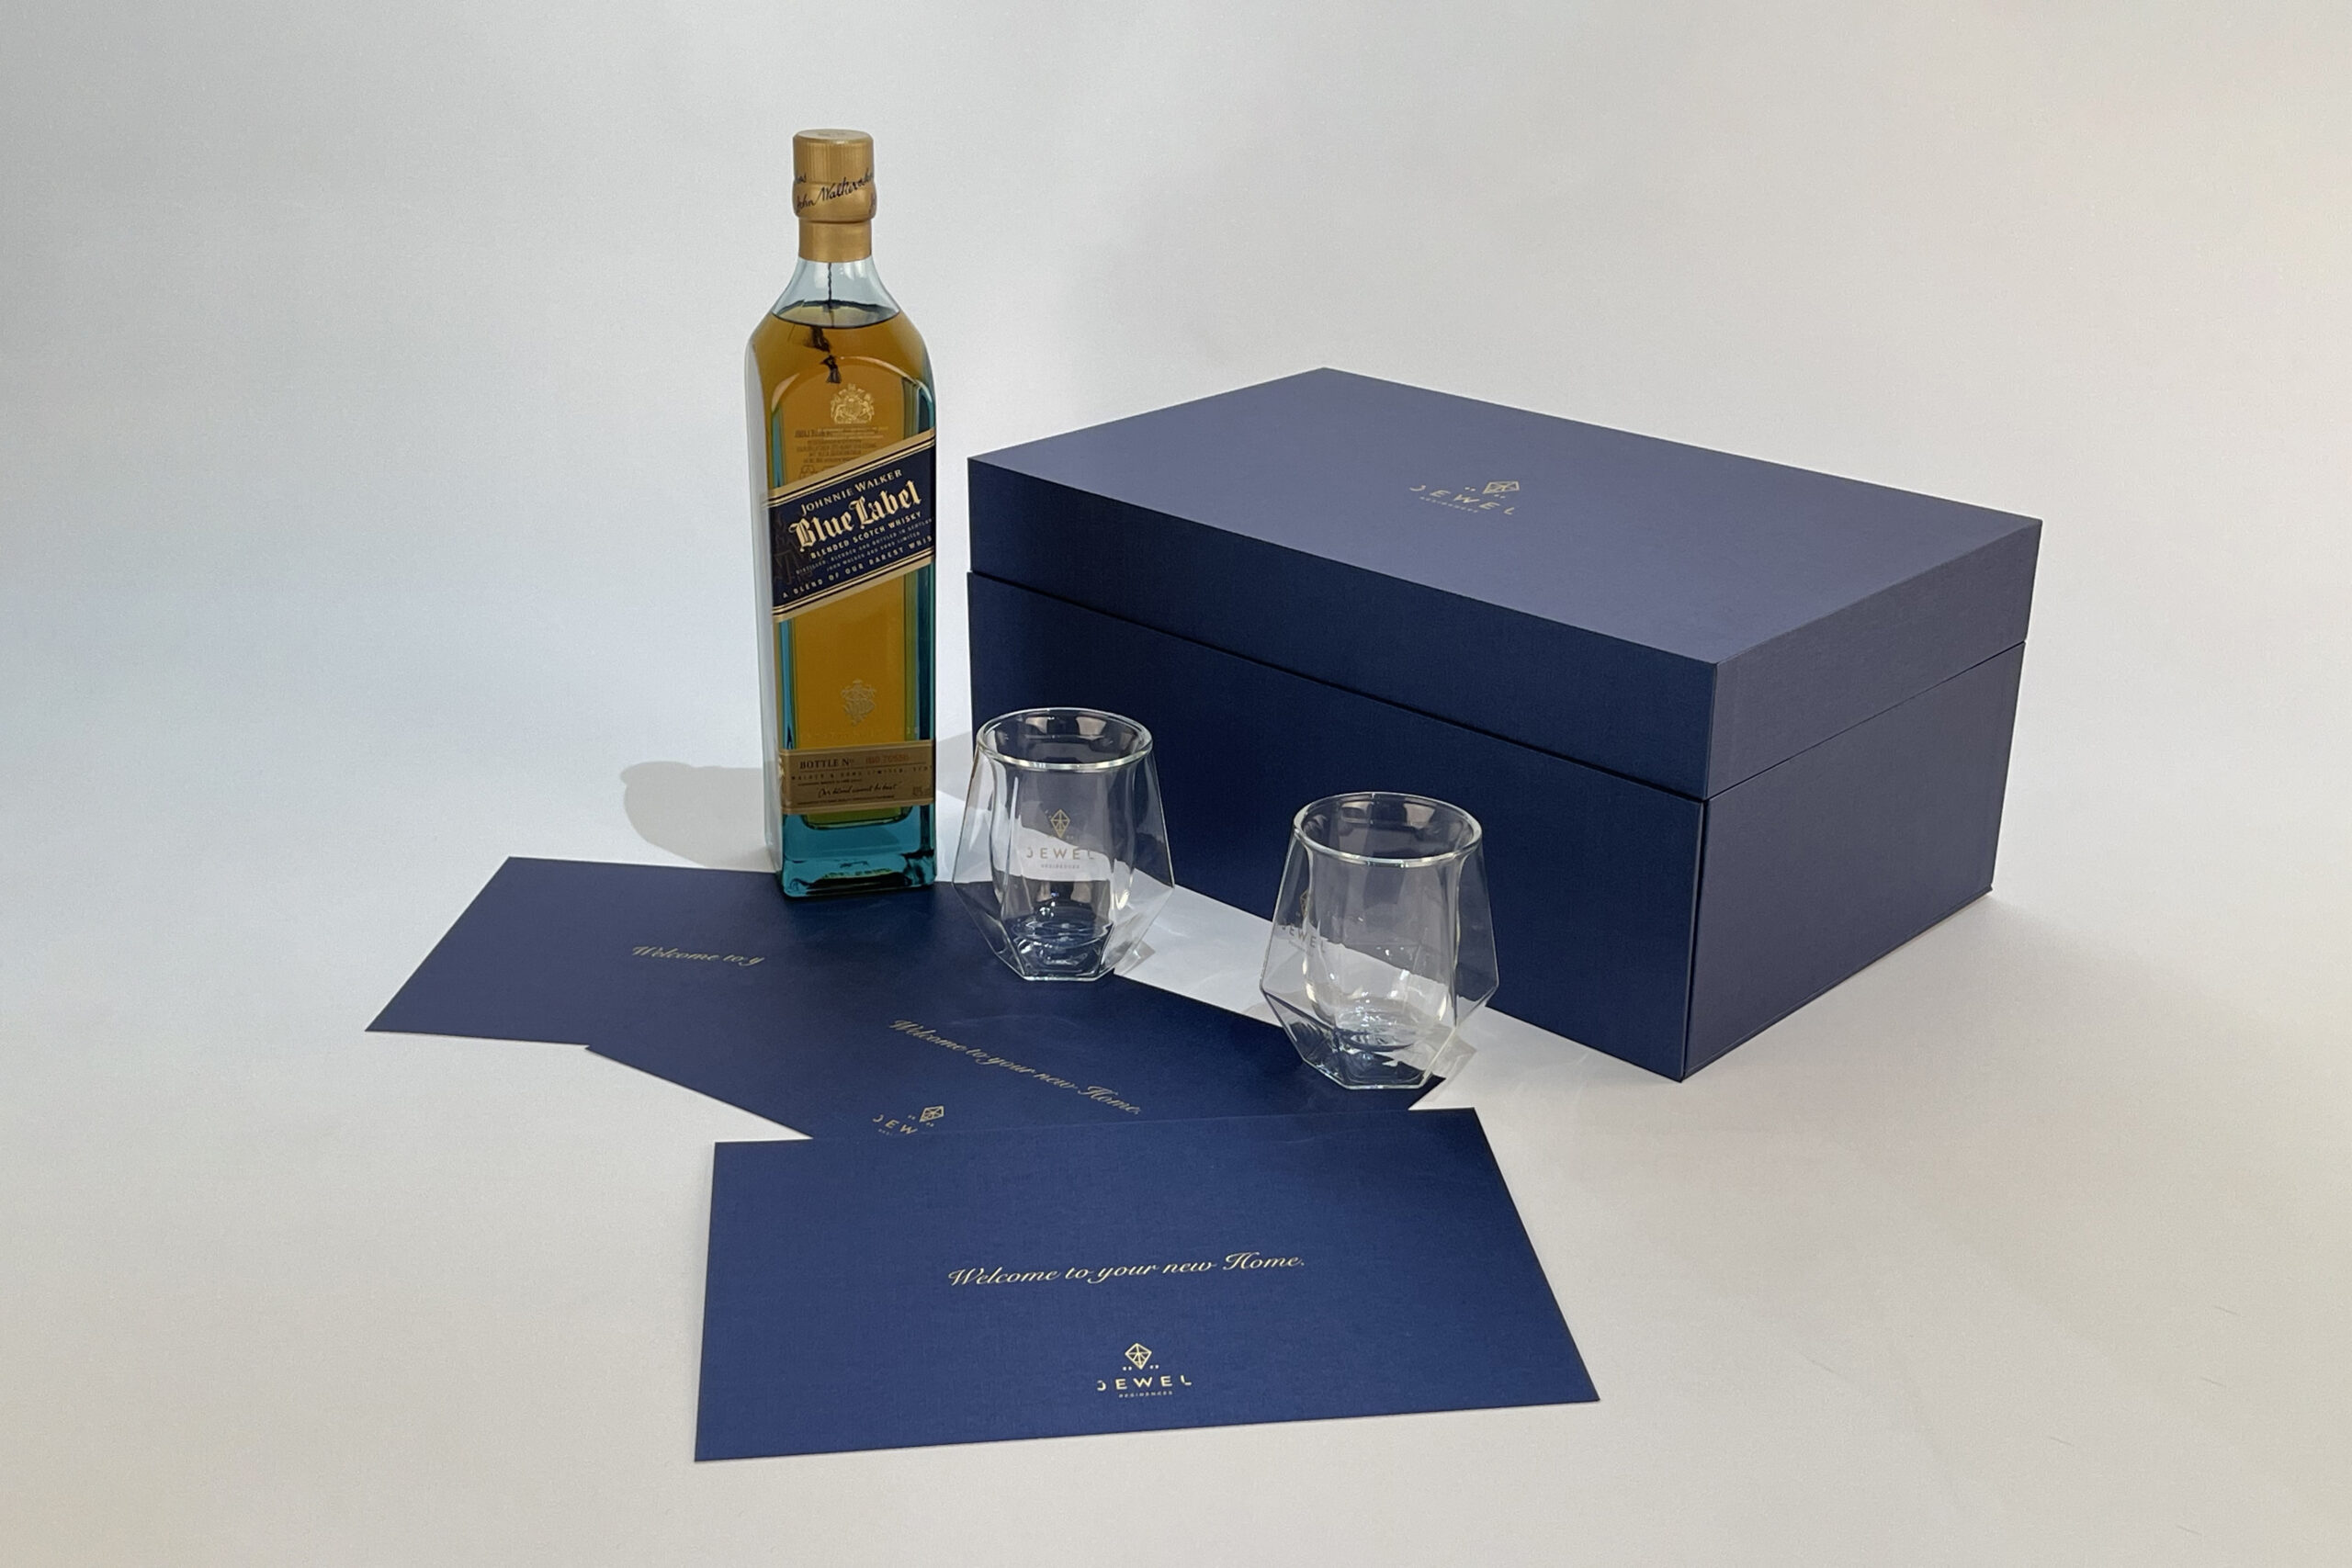 Jewel settlement pack with blue label and drinking glasses.